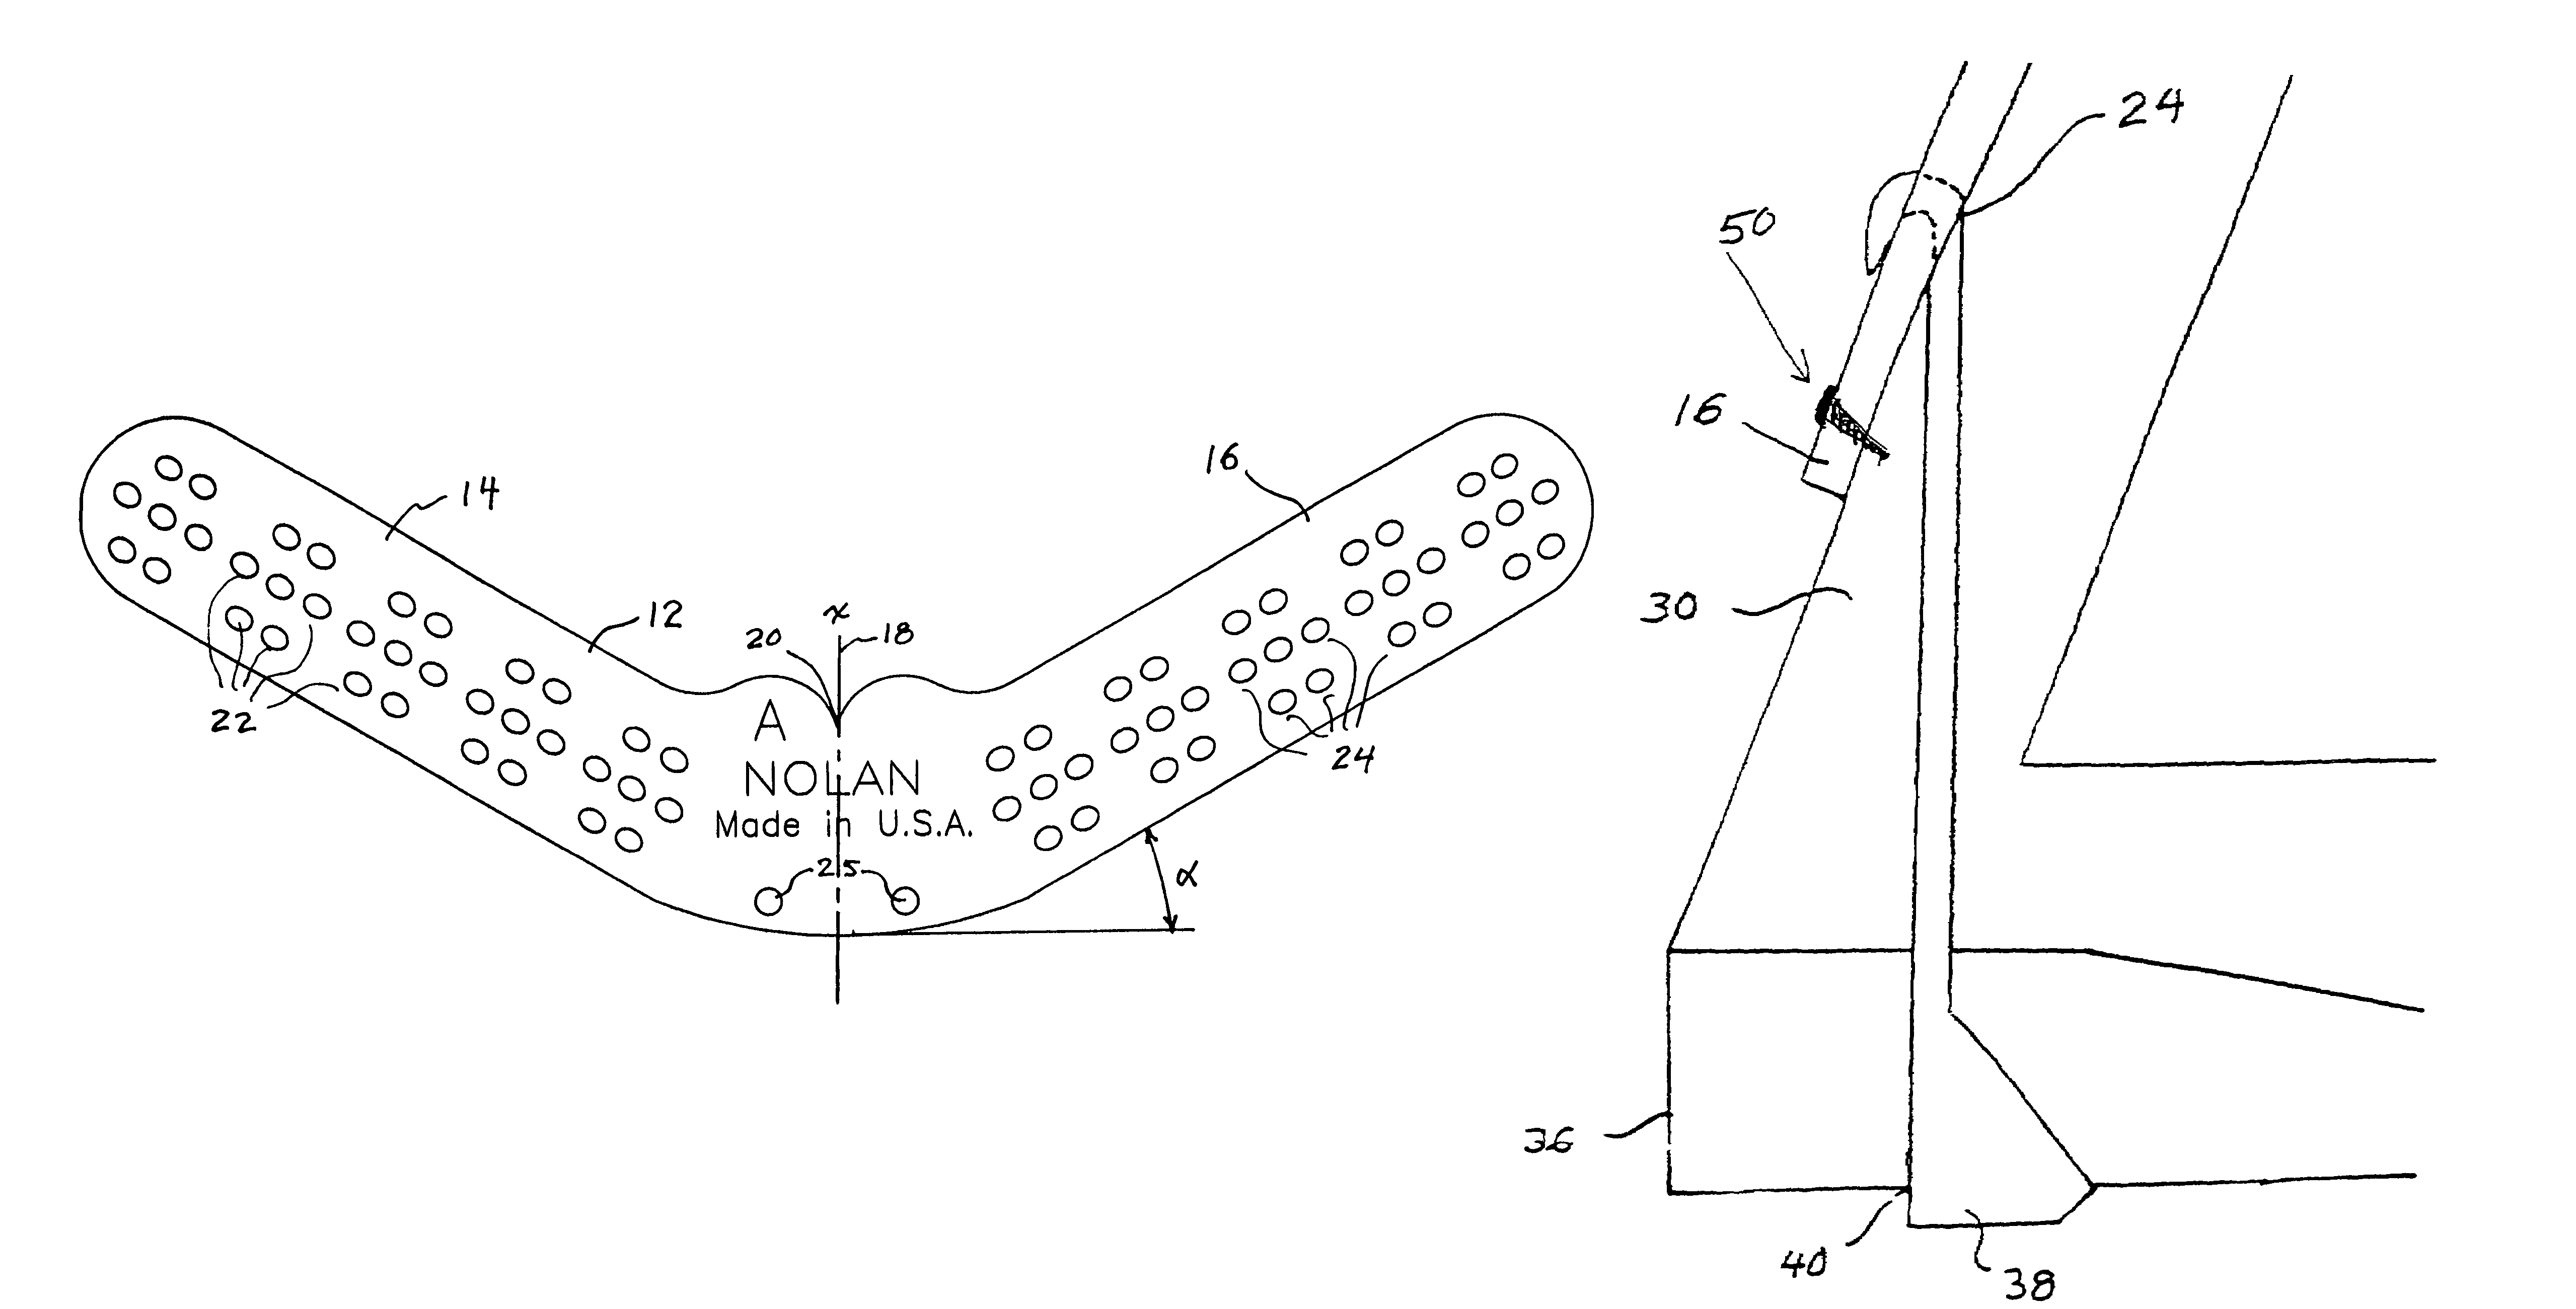 Method and apparatus for treating hoof problems